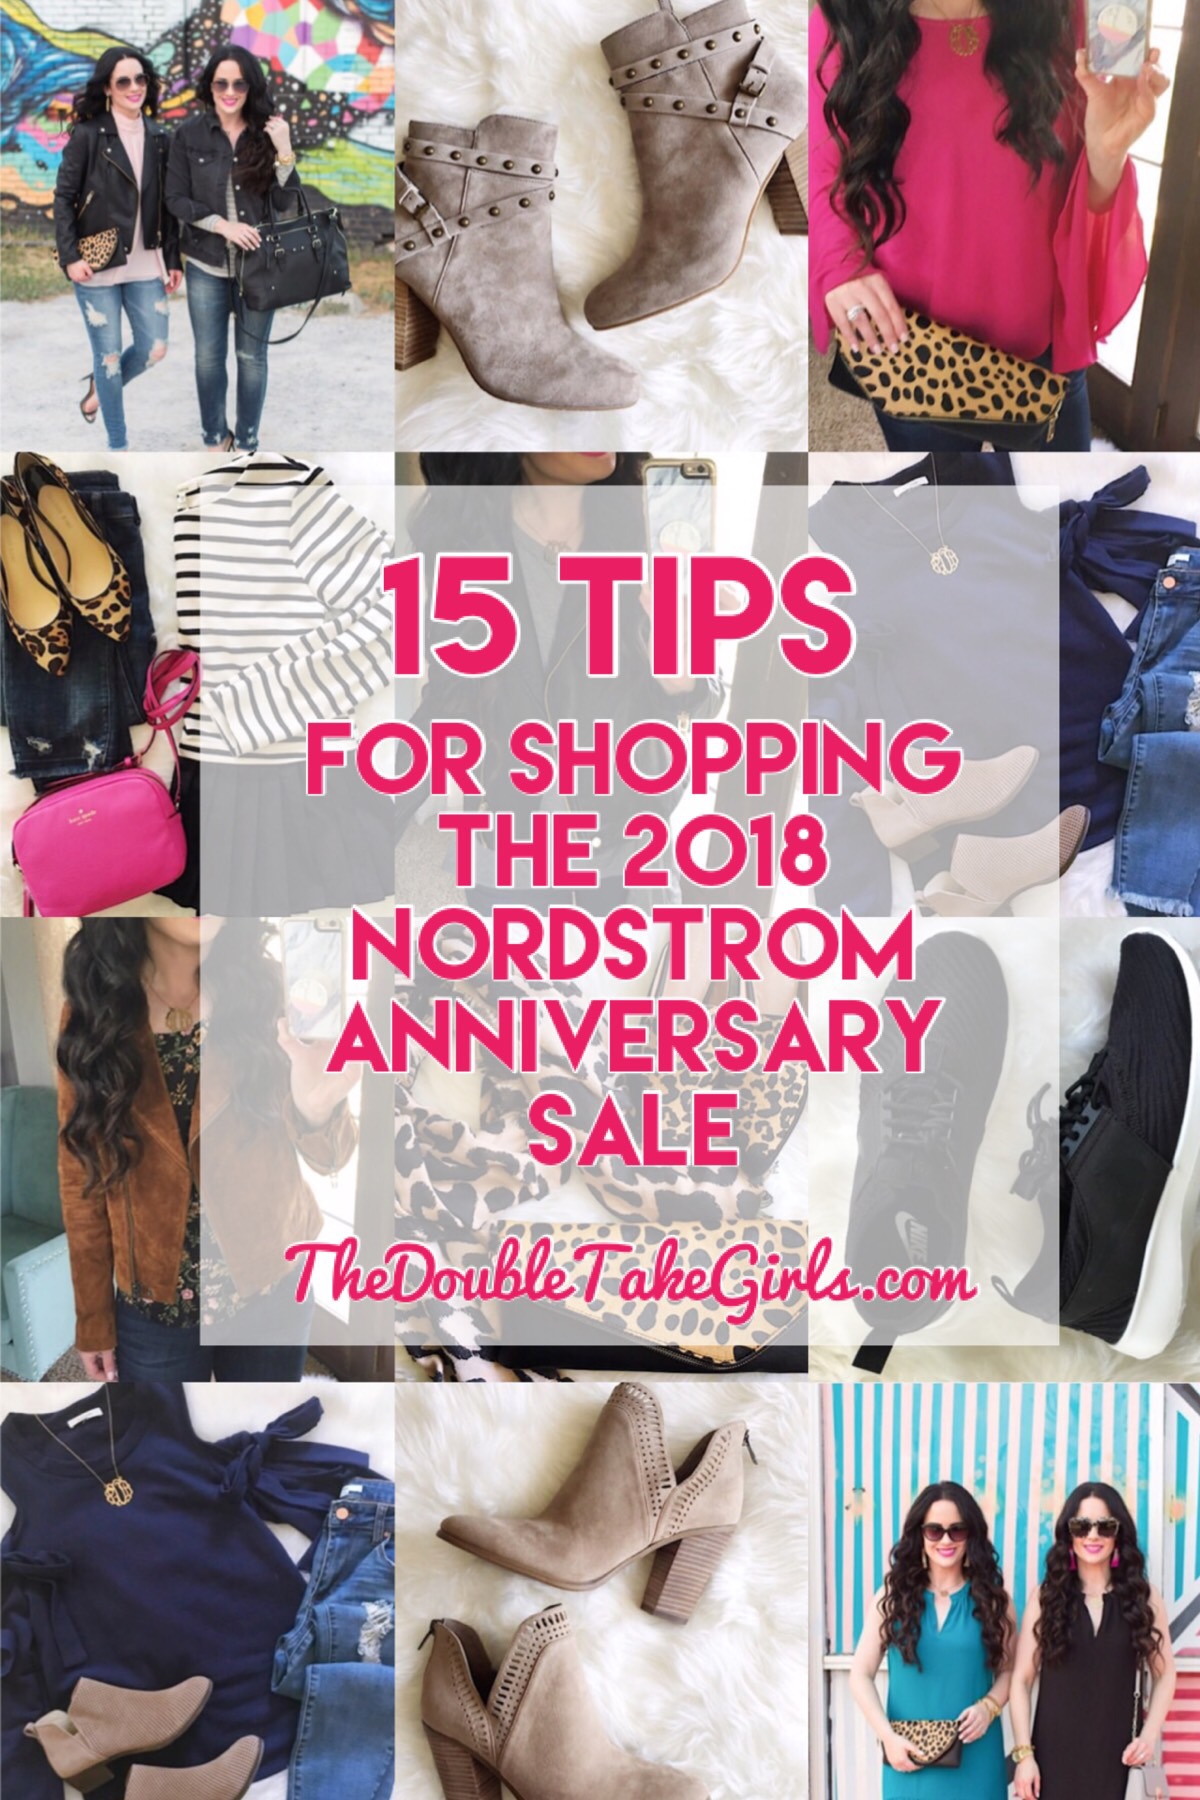 15-tips-anniversary-sale-nordstrom-2018